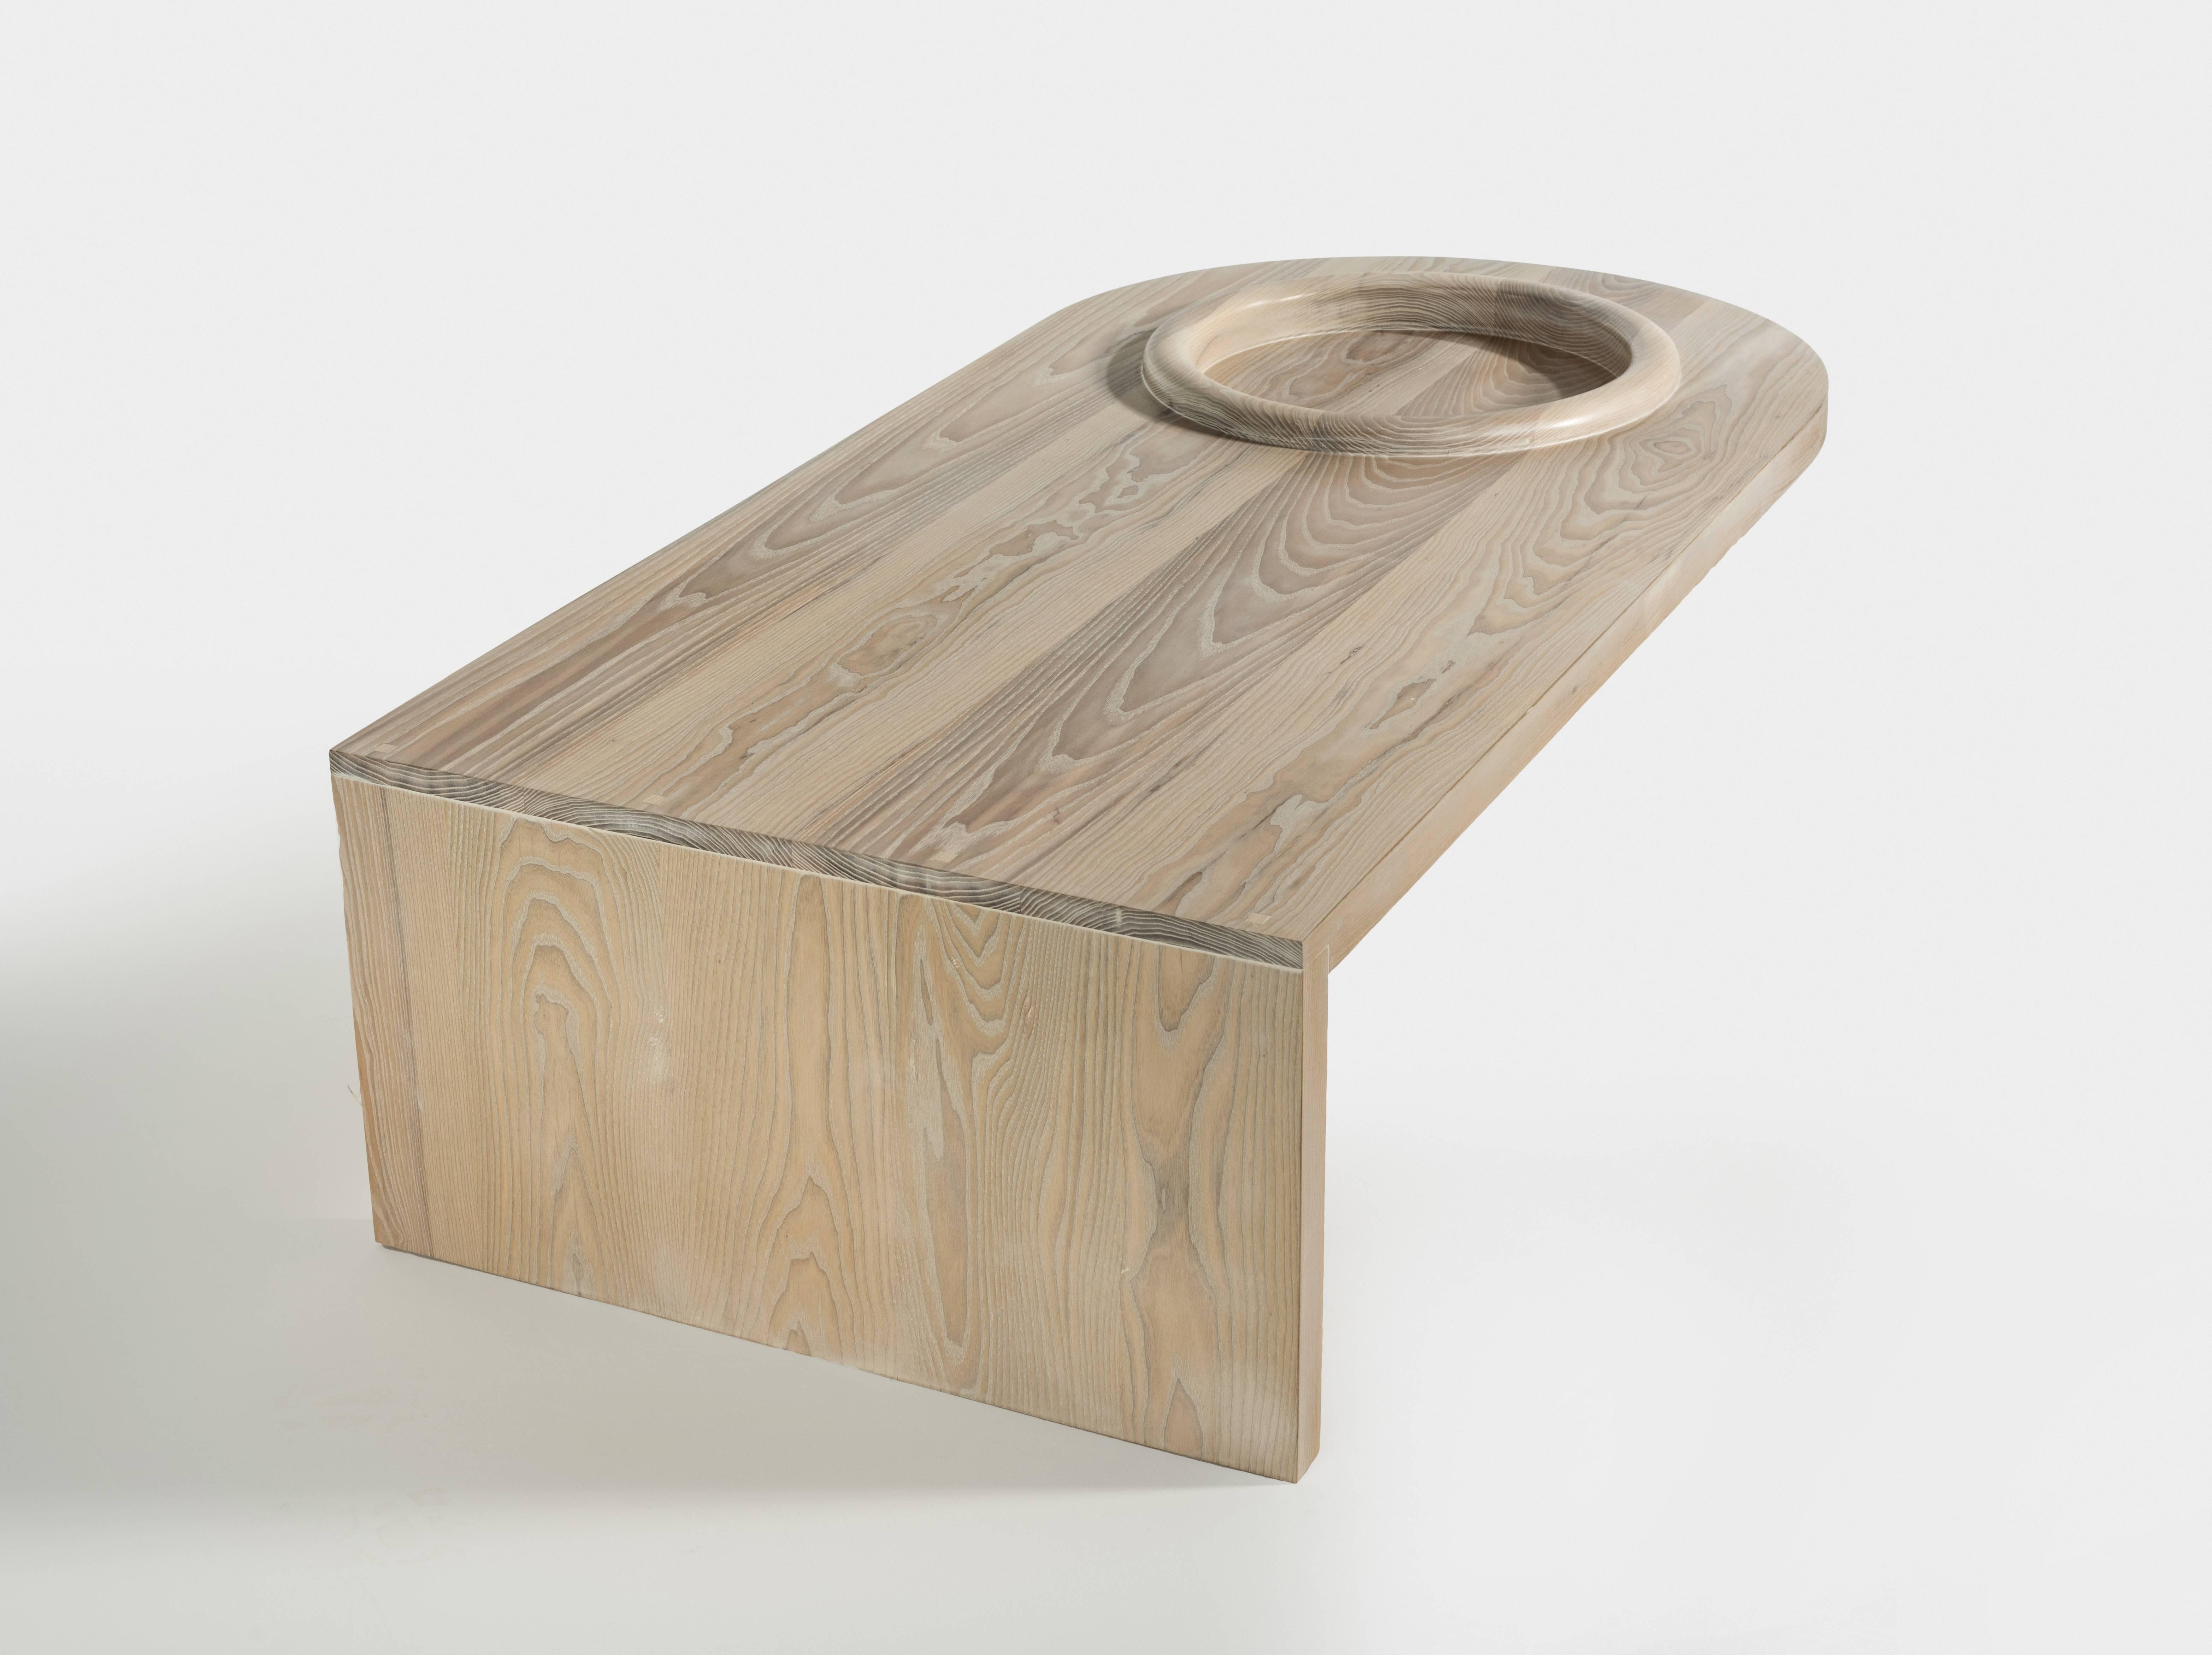 The Monolith slab takes the Monolith motif and creates a visually striking surface.

The wood of the table top has been carved away to allow the grain to roll over the rim and down into the cylinder.

All pieces can be customized in size.
 